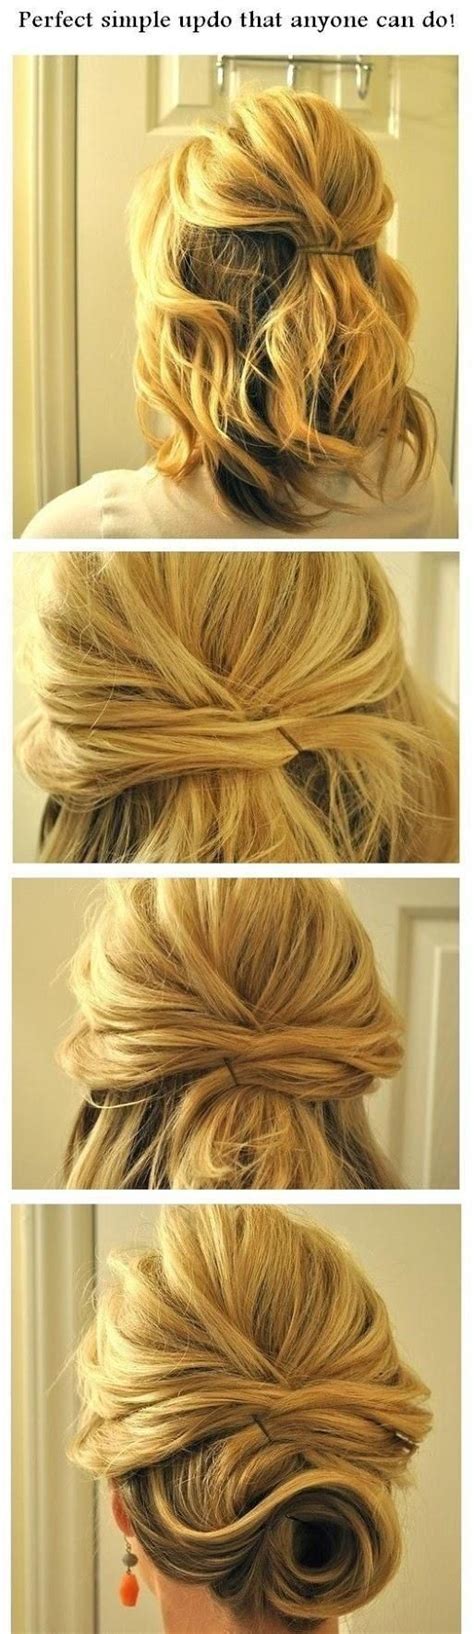 See more ideas about short hair updo, short hair updo easy, short hair styles. 12 Short Updo Hairstyles Ideas: Anyone Can Do - PoPular ...